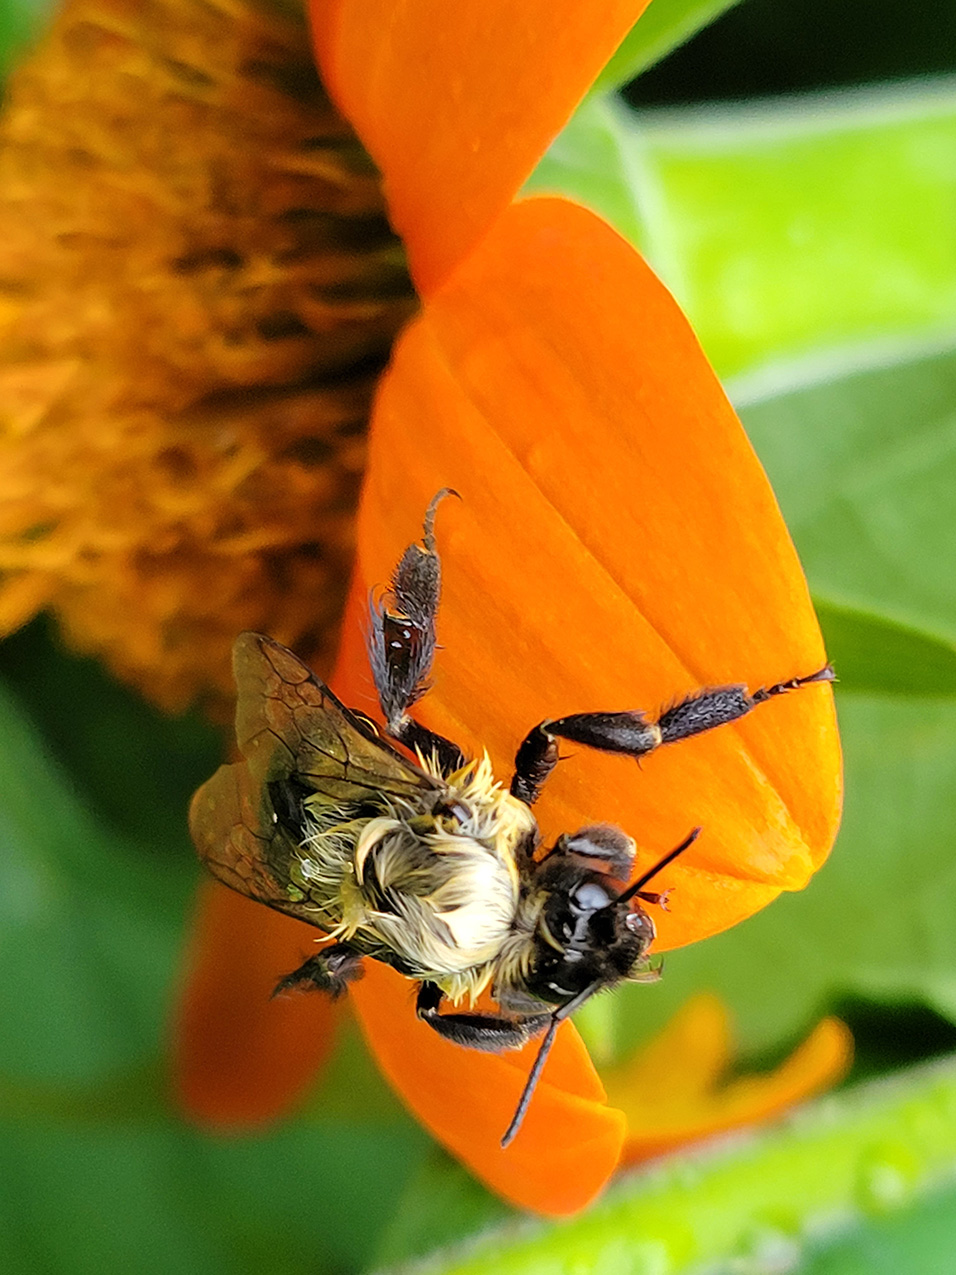 closeup of a wet bee with tousled hair on a bright orange flower petal facing the sunlight 